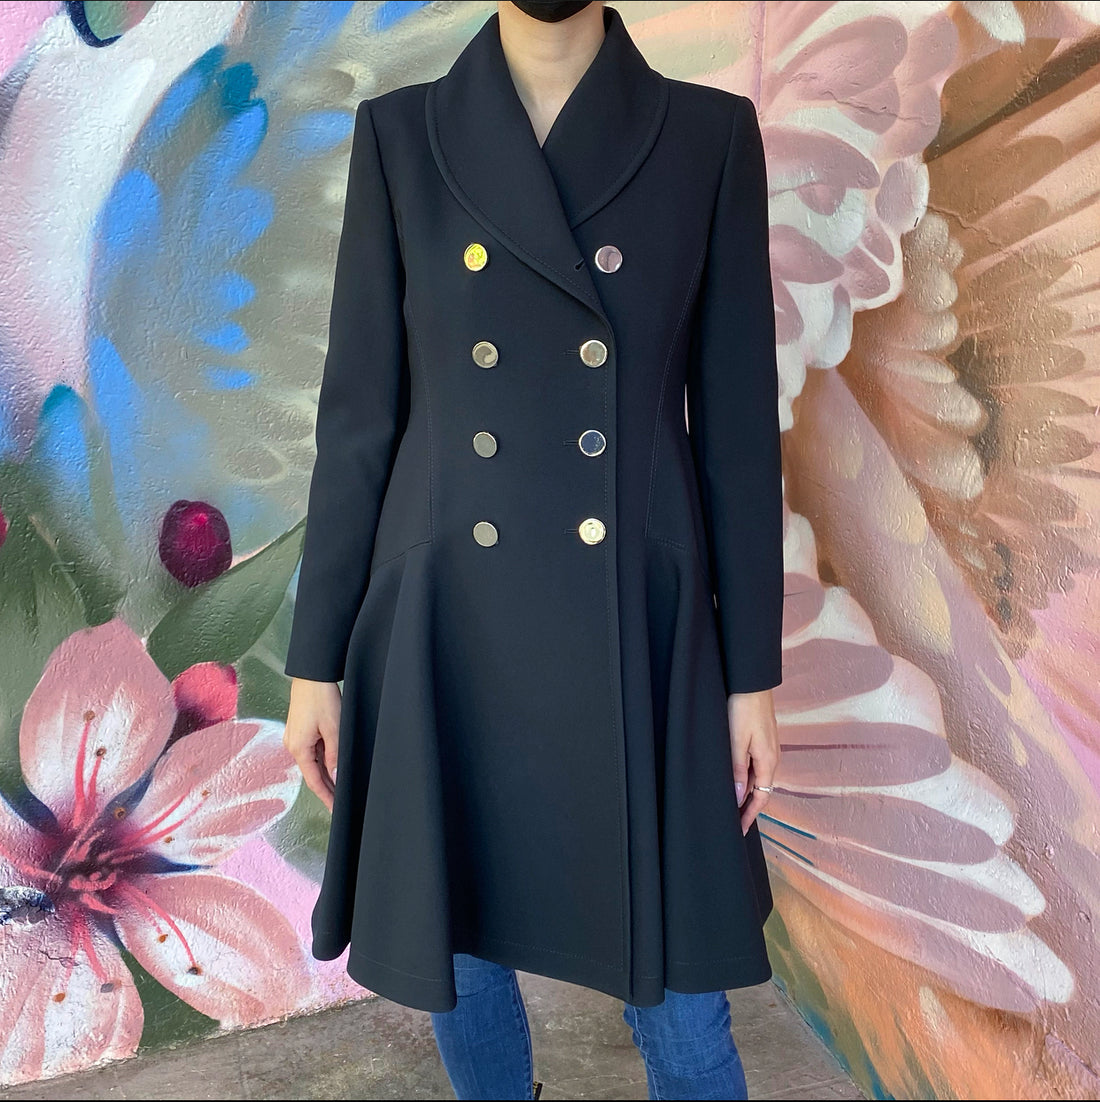 Gucci Black Fitted Coat with Silver Buttons - IT40 / USA 4